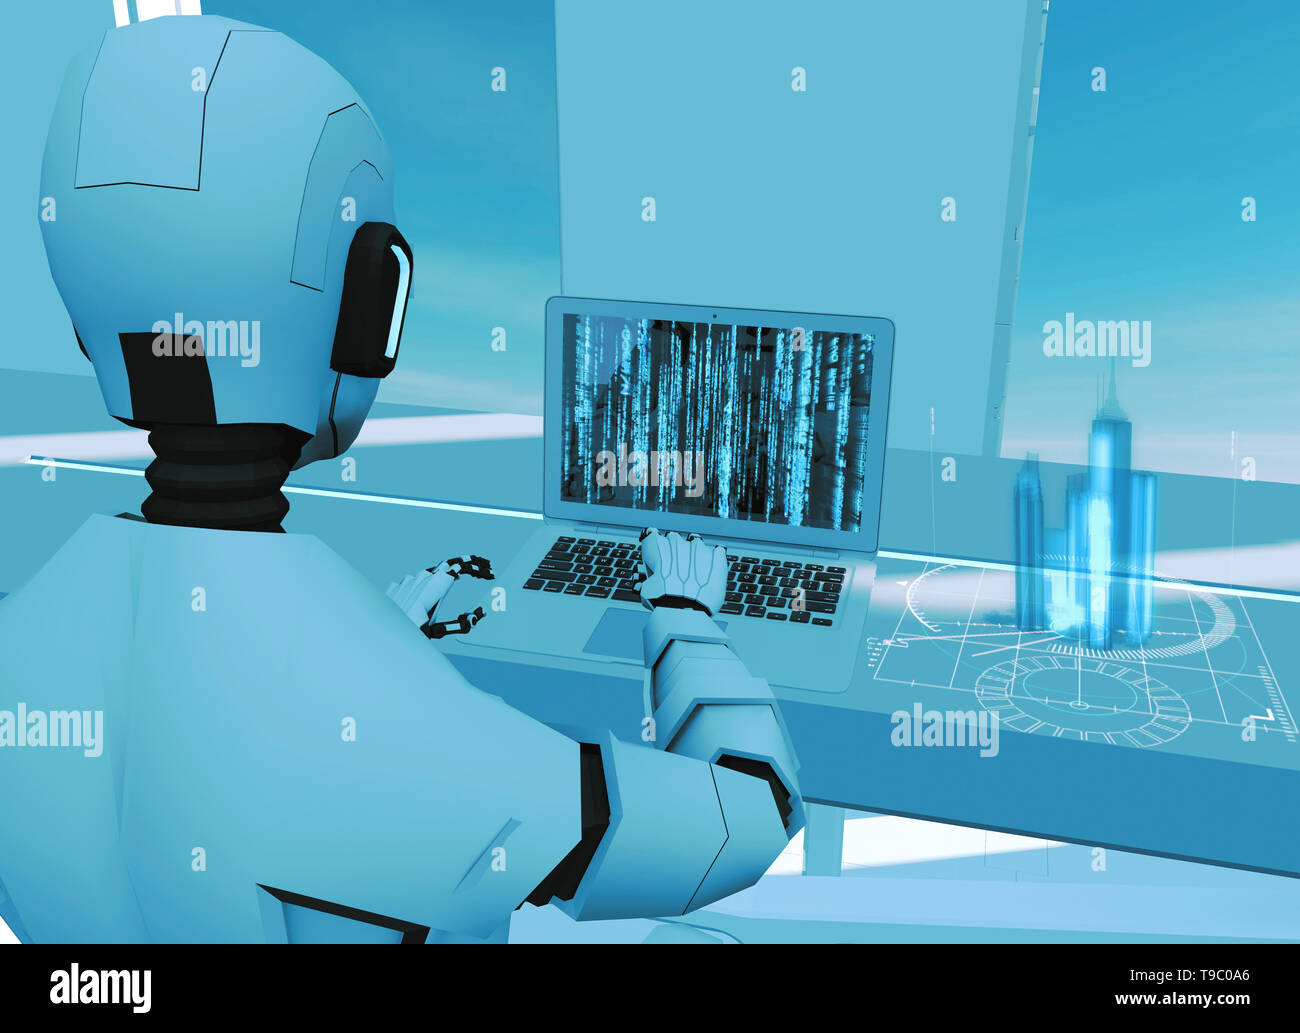 Artificial intelligence, robot. Cyborg on the computer. Sci-fi. Science fiction. Programming. Architectural project, city skyscrapers, holograms. Stock Photo